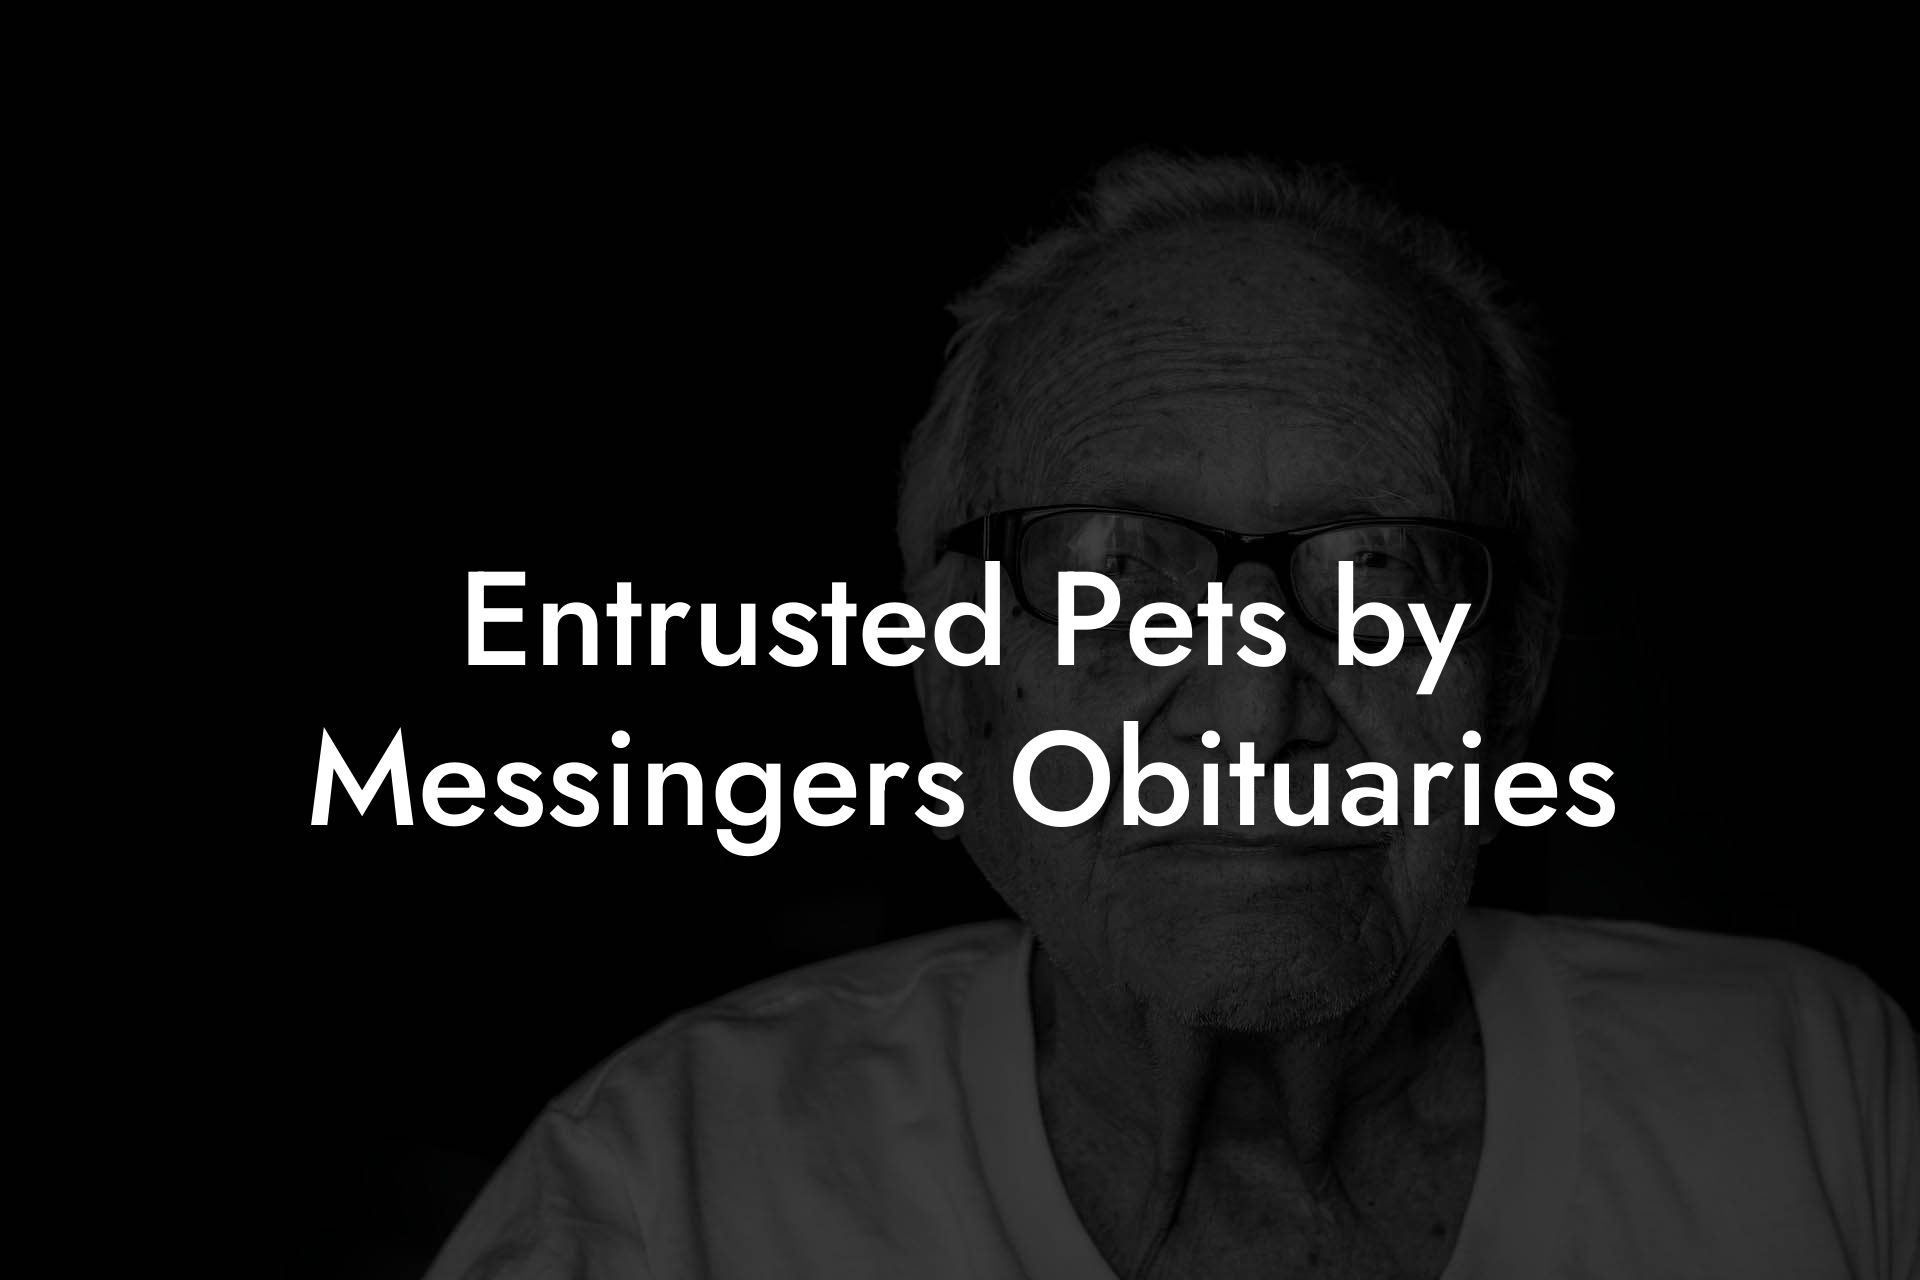 Entrusted Pets by Messingers Obituaries